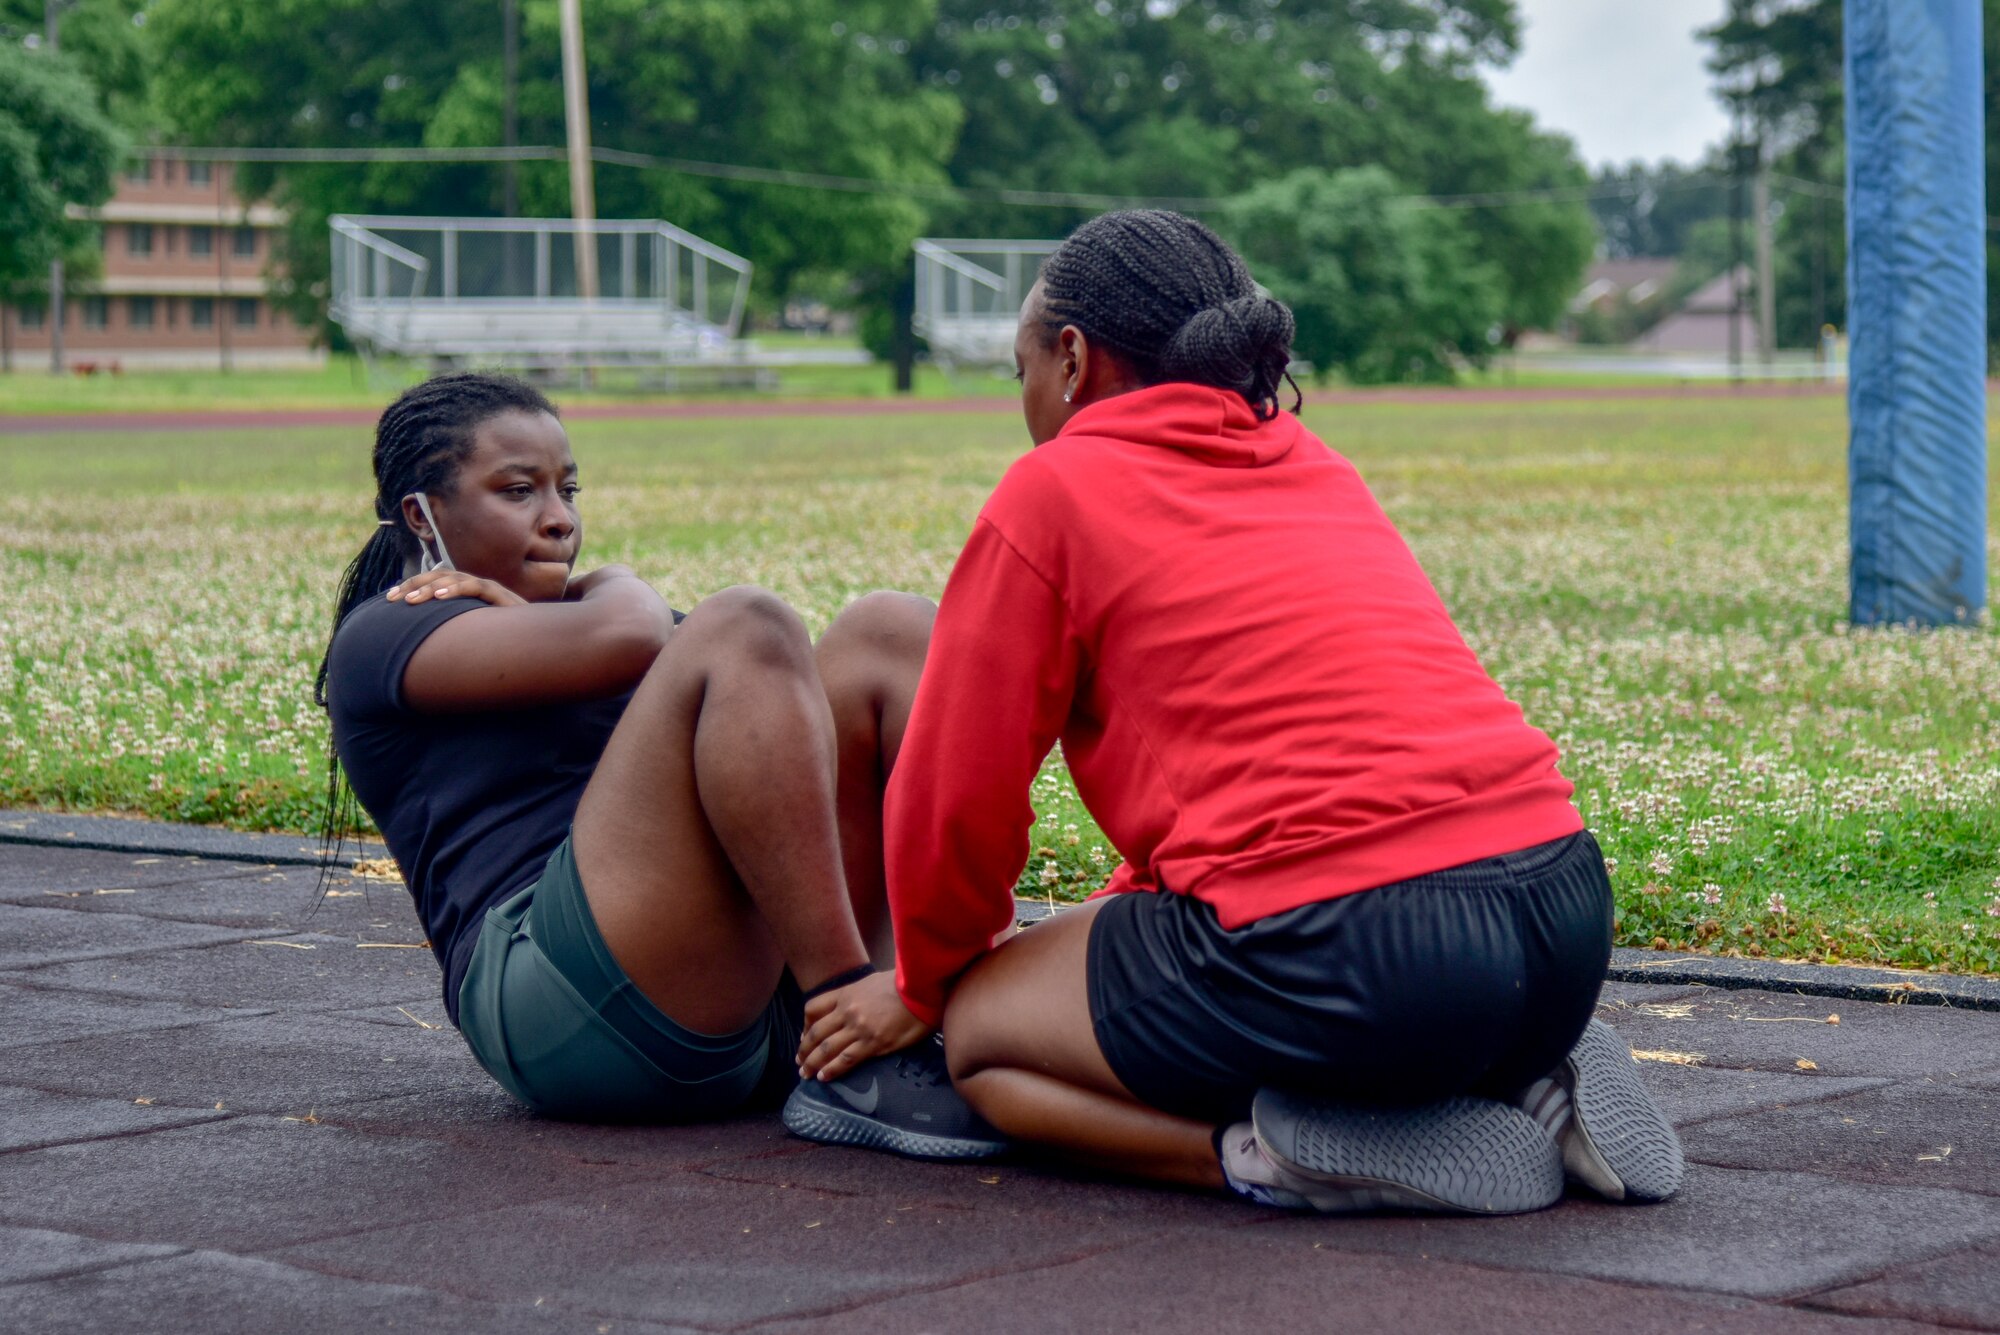 Akorfa Domey, a trainee in the 913th Airlift Group’s Development and Training Flight, is tested on her sit ups during the Physical Training portion of the drill weekend. Domey decided to join the Air Force Reserve after she and her family moved to Arkansas from Ghana two years ago. (U.S. Air Force Photo by Senior Airman Kalee Sexton)